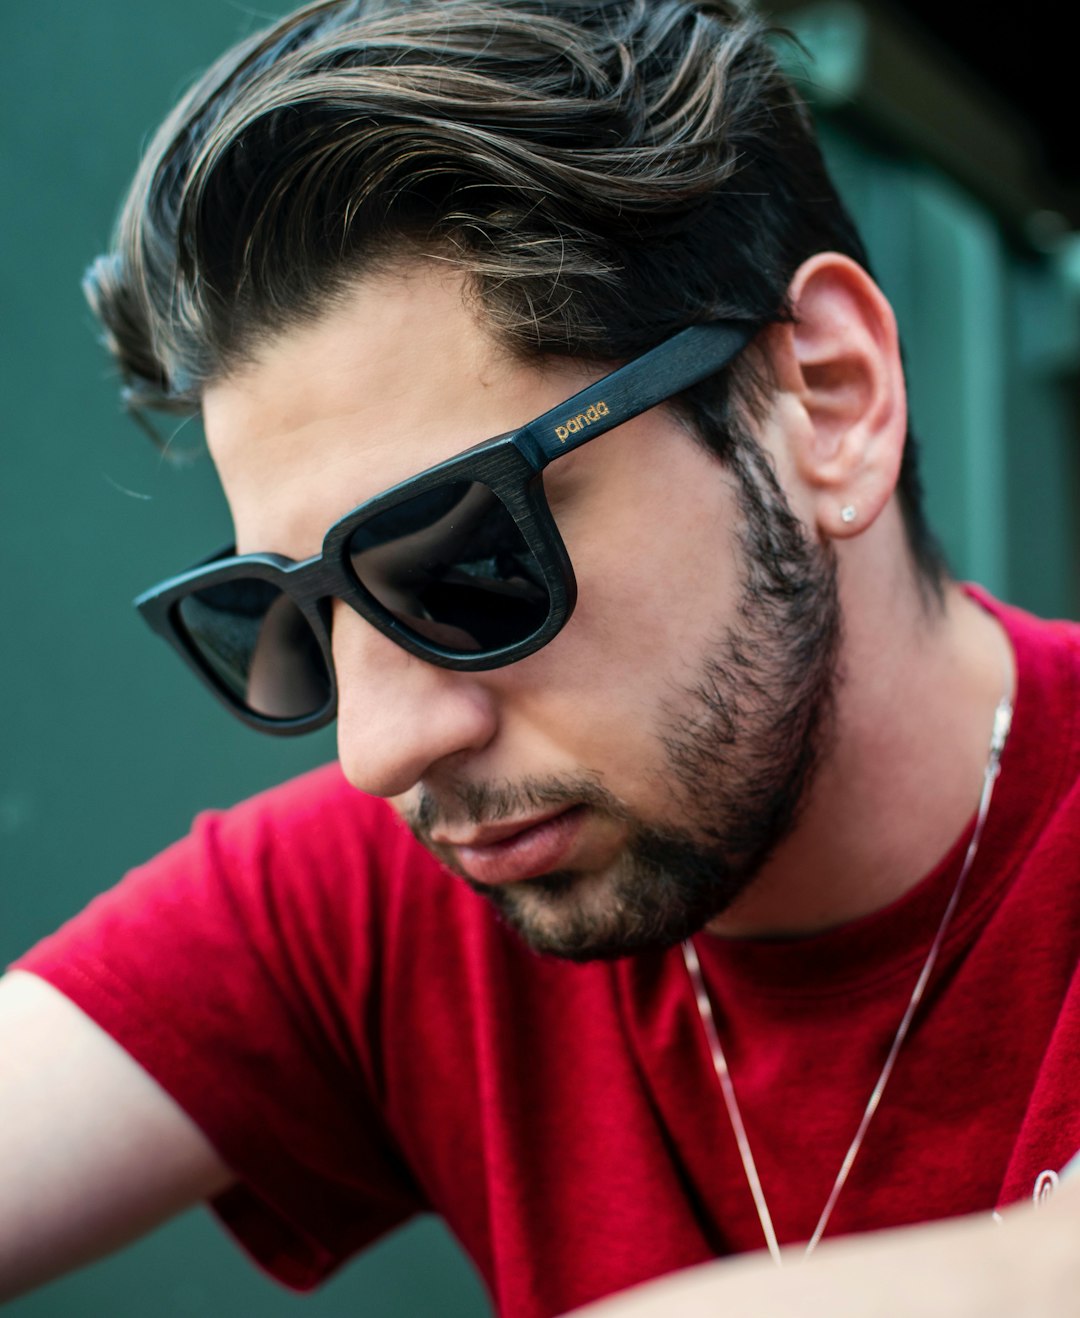 man wearing black sunglasses and red shirt